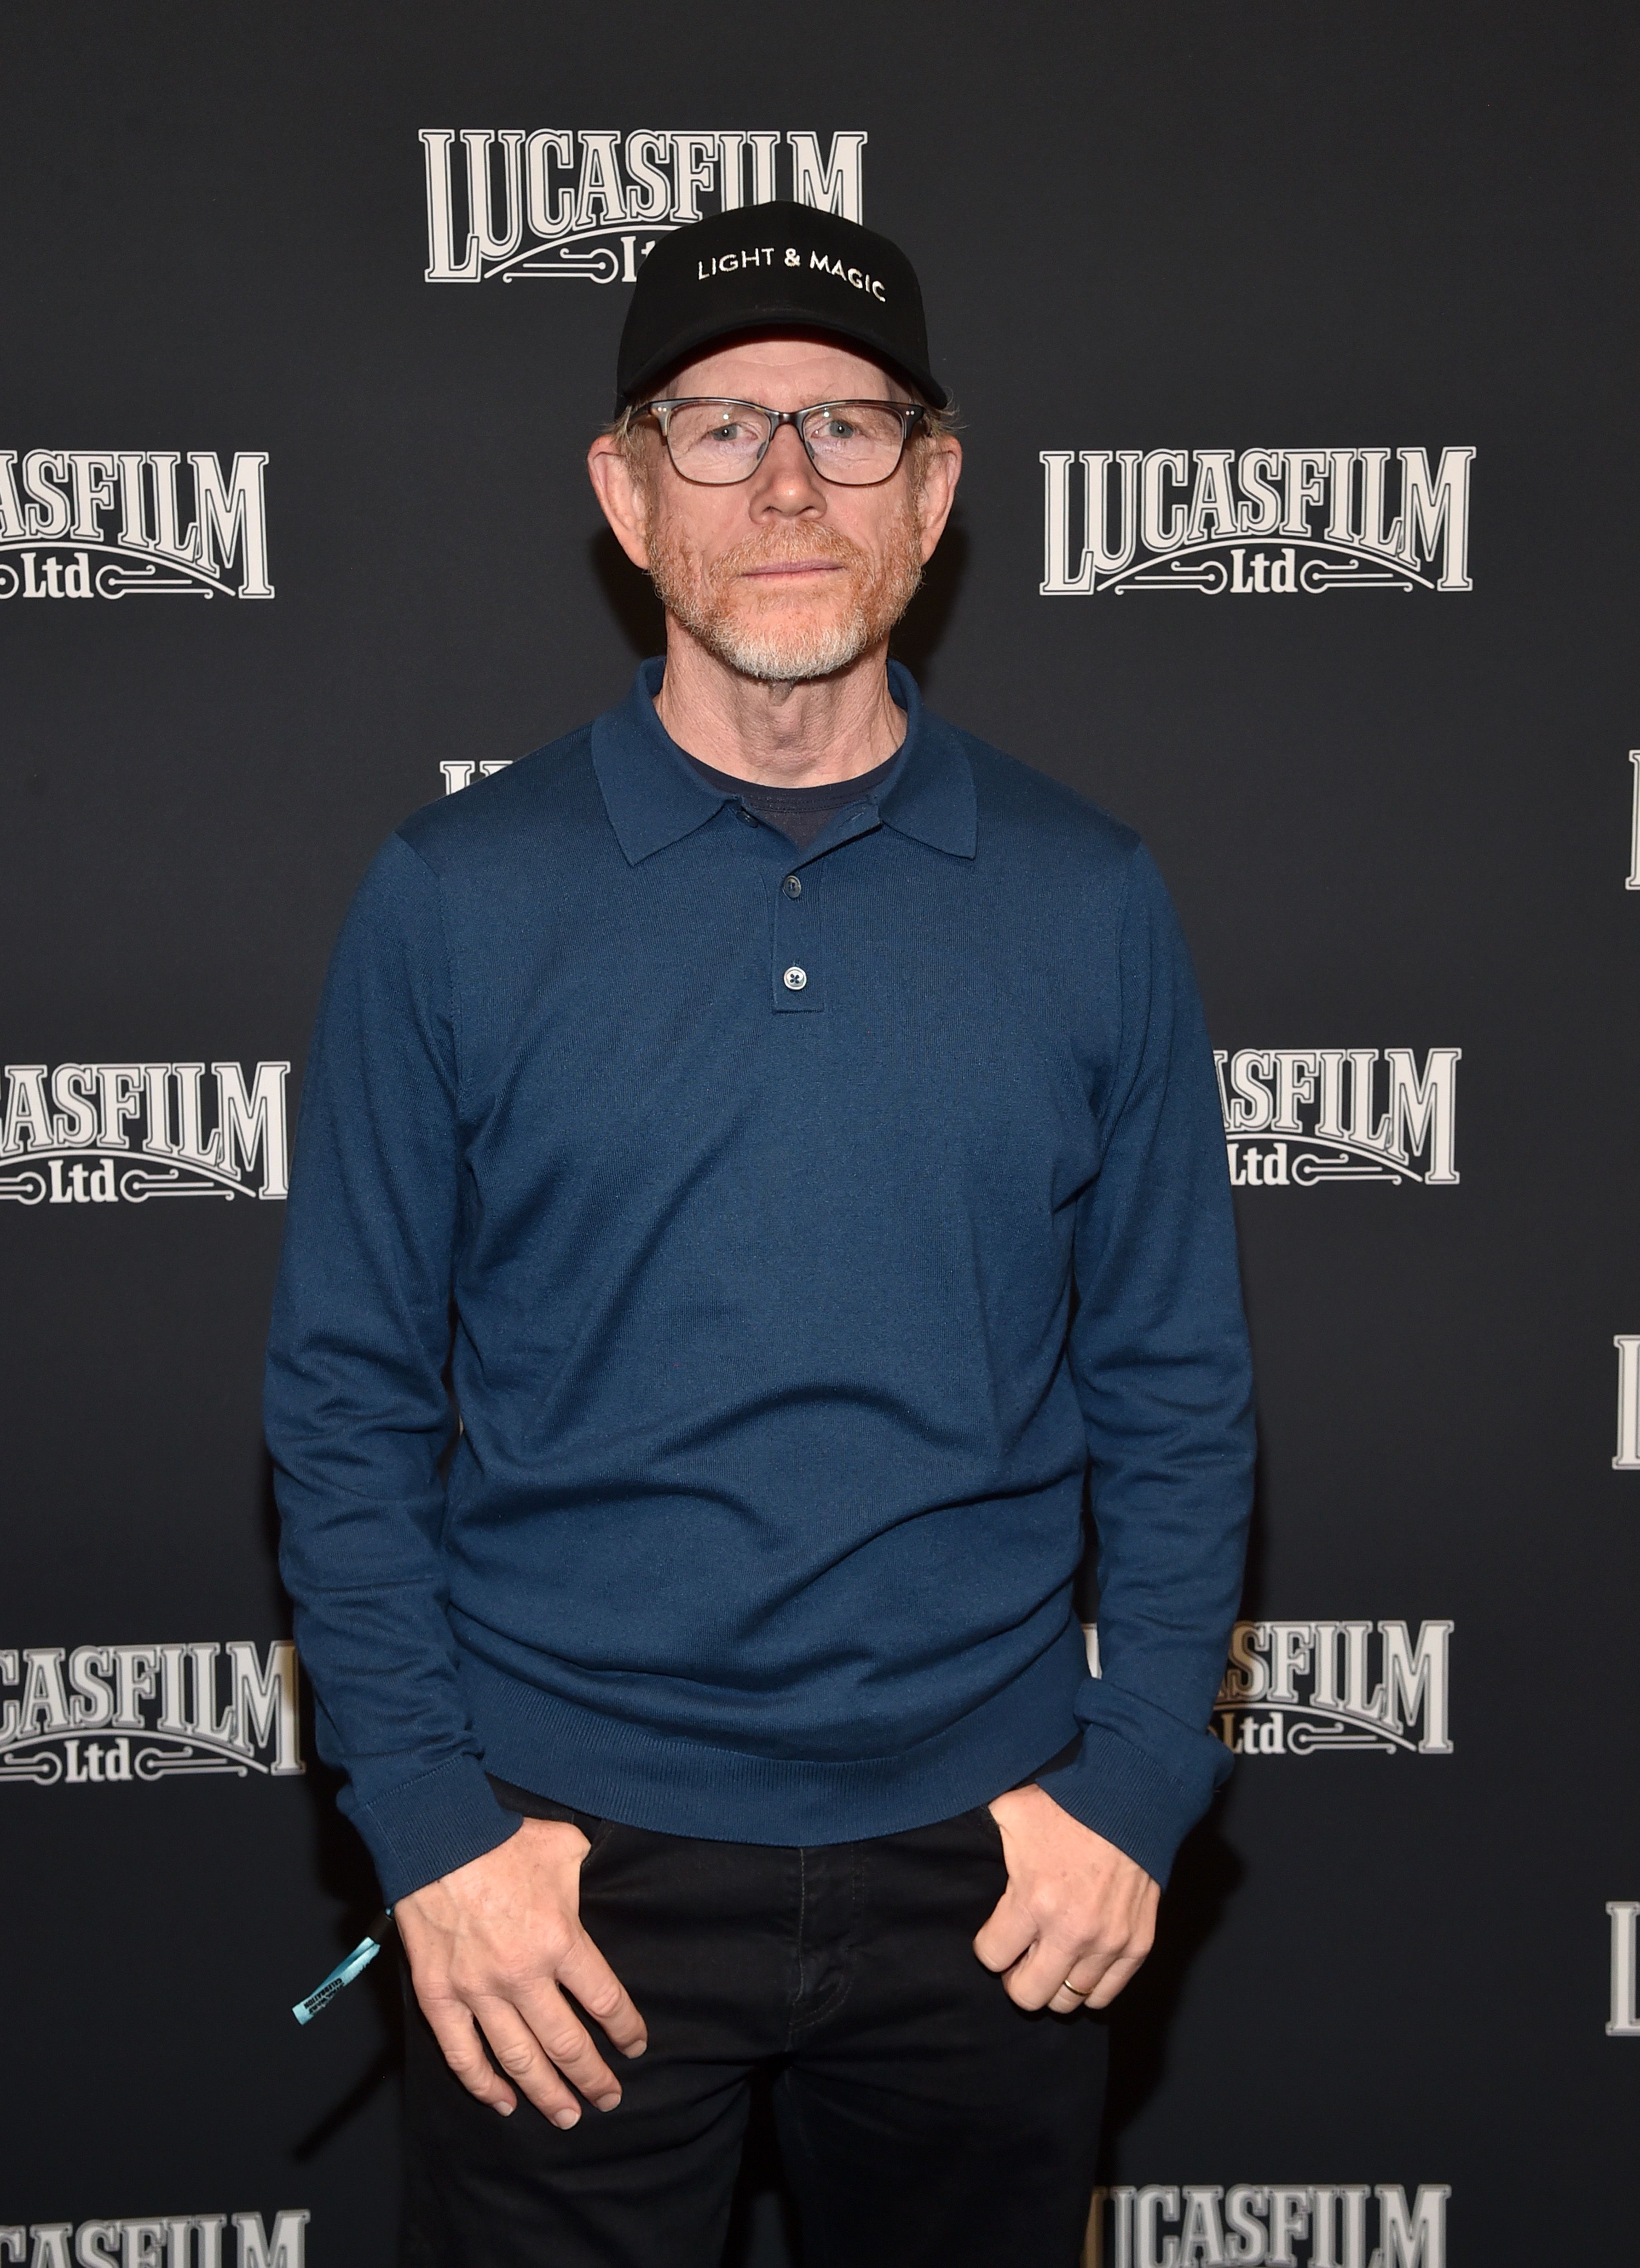 Ron Howard attends a press conference for “Light & Magic” at Star Wars Celebration in Anaheim, California on May 27, 2022. | Source: Getty Images